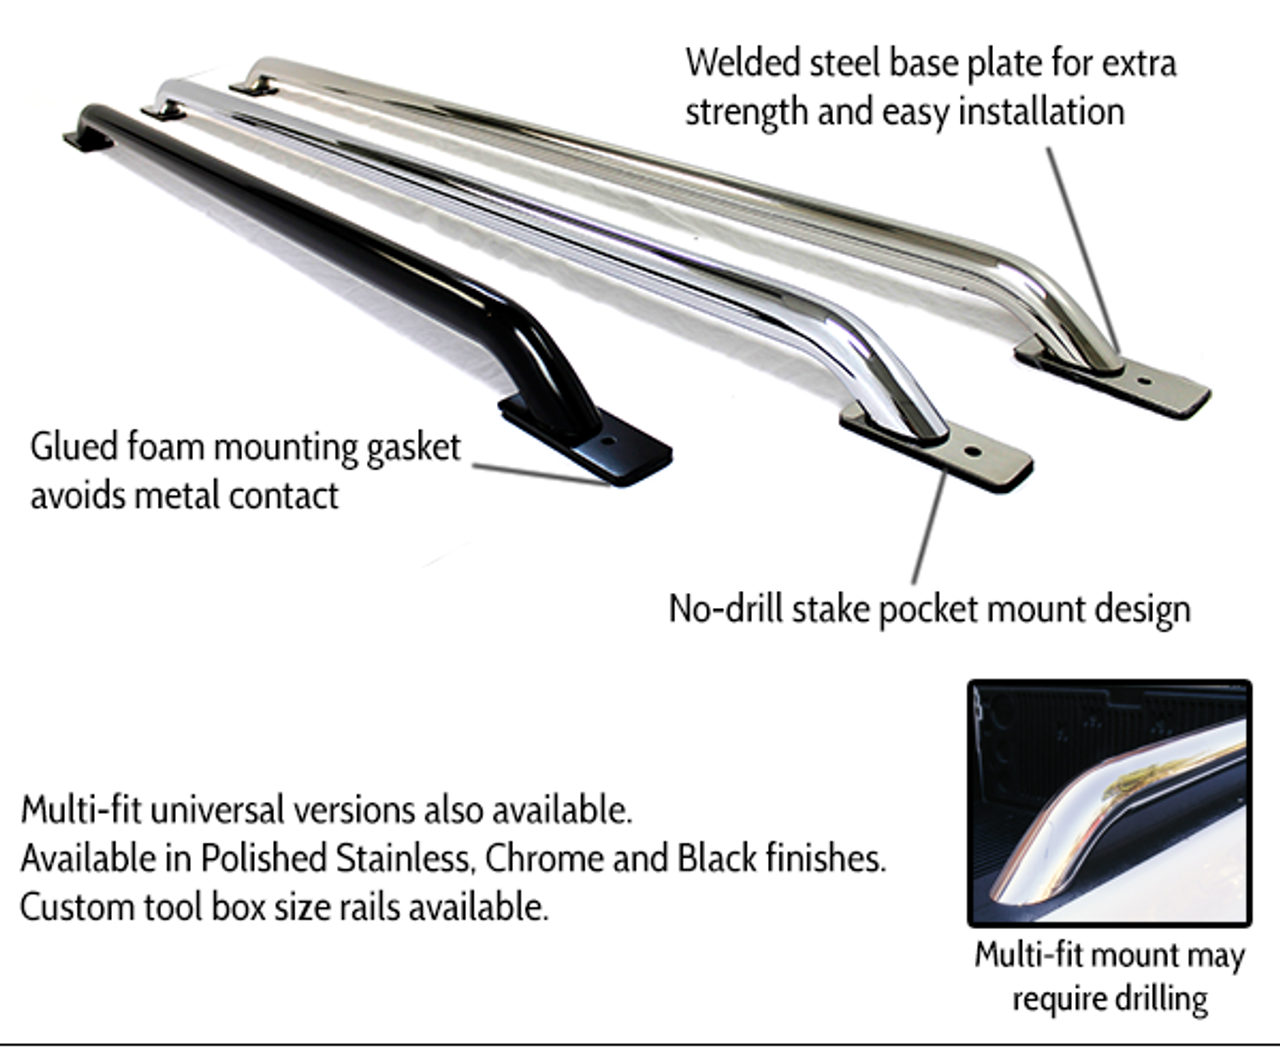 Go Rhino 8060UPS Universal Bed Rails, 60 inch Long, Without base plates, Polished Stainless Steel, Mounting Kit Included, Fits Ford Chevrolet Toyota Jeep, Dodge, Nissan, Buick GMC